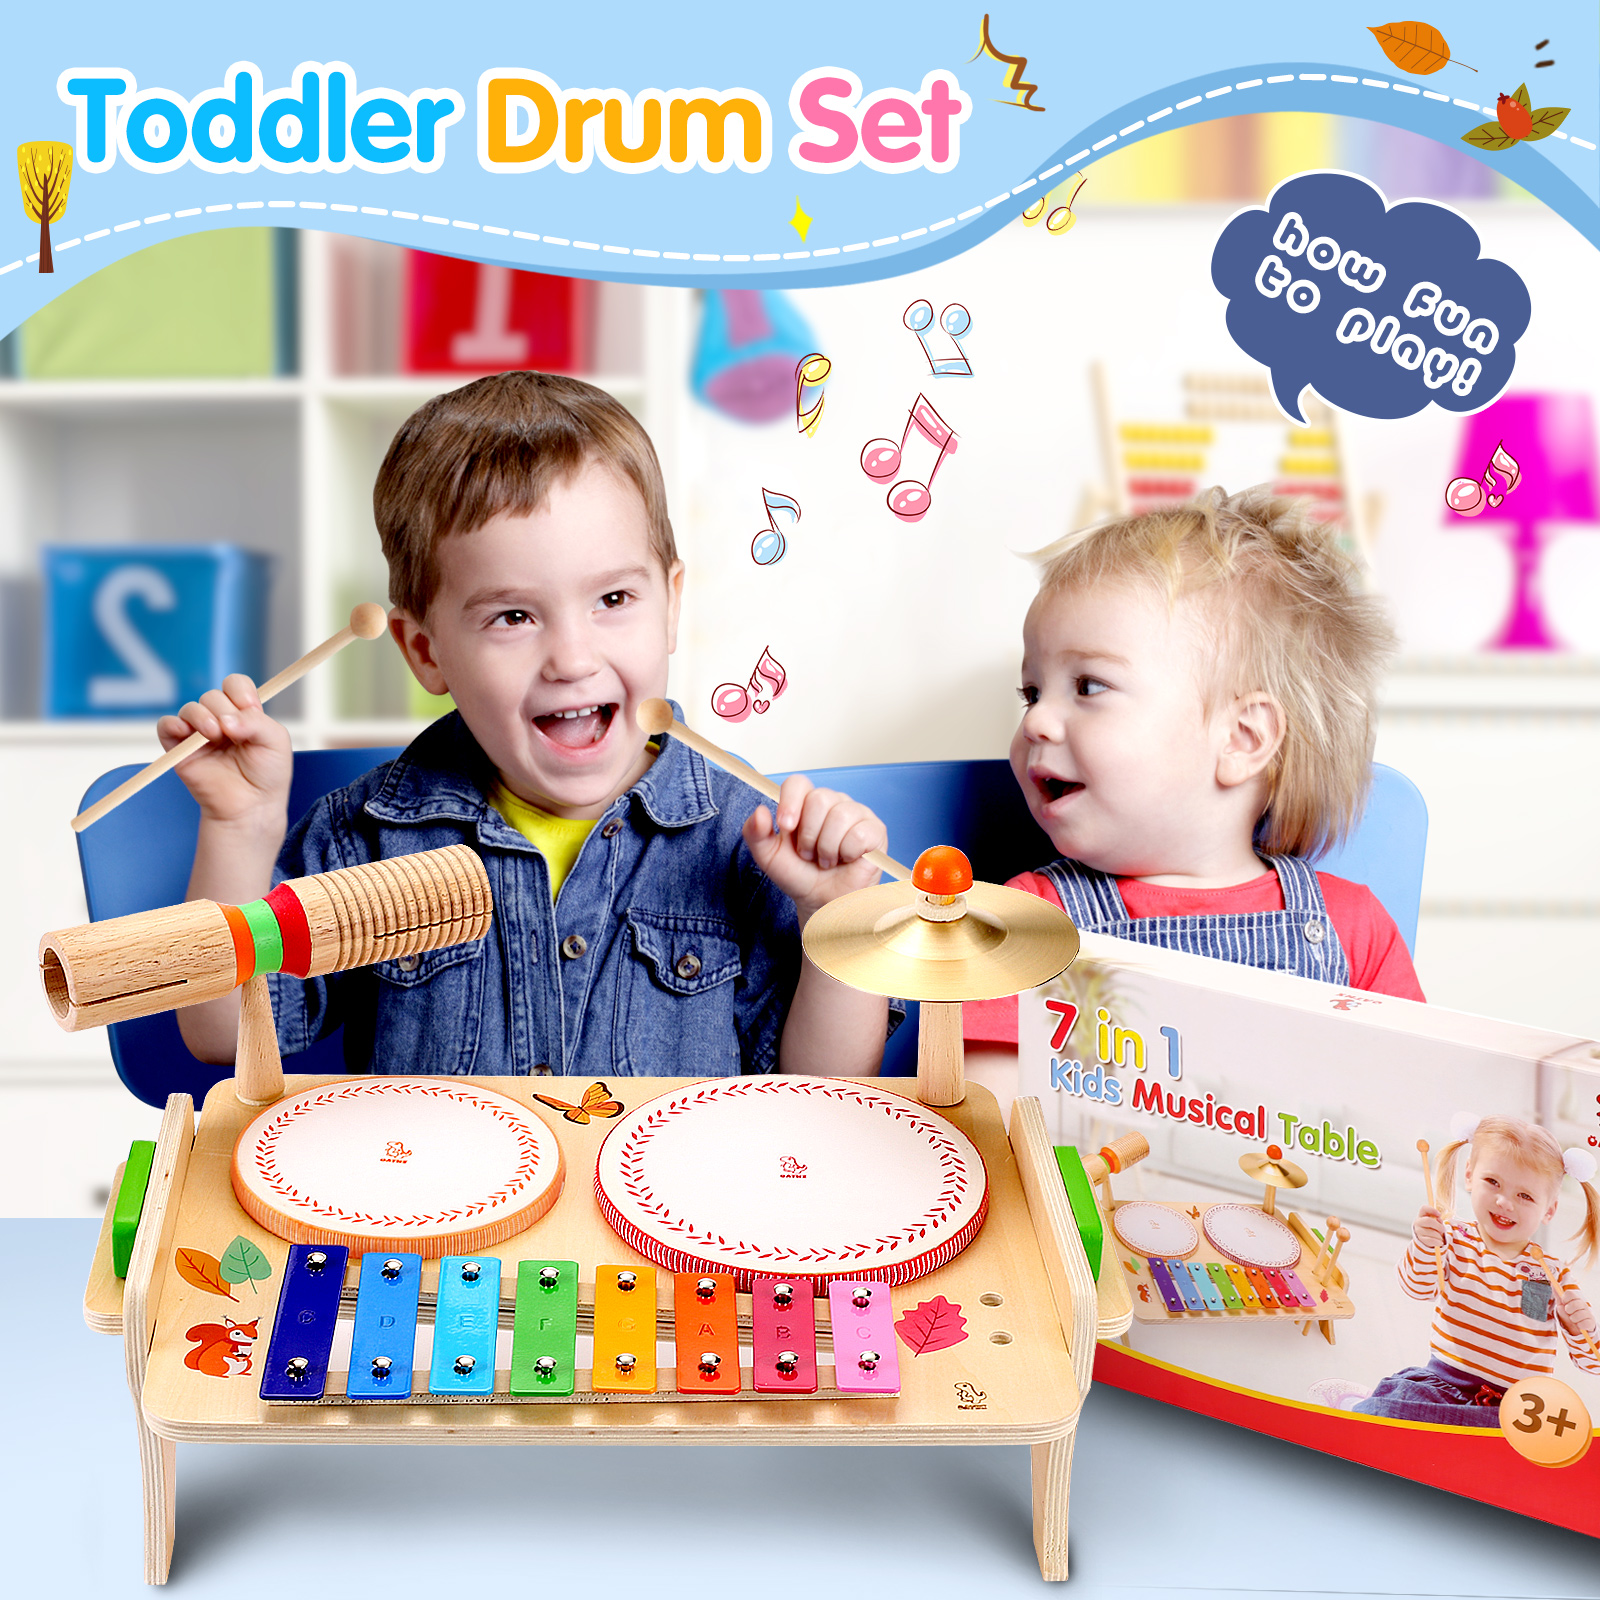 OATHX Kids Drum Set, Toddler Musical Instruments Music Toys, 7 in 1 ...